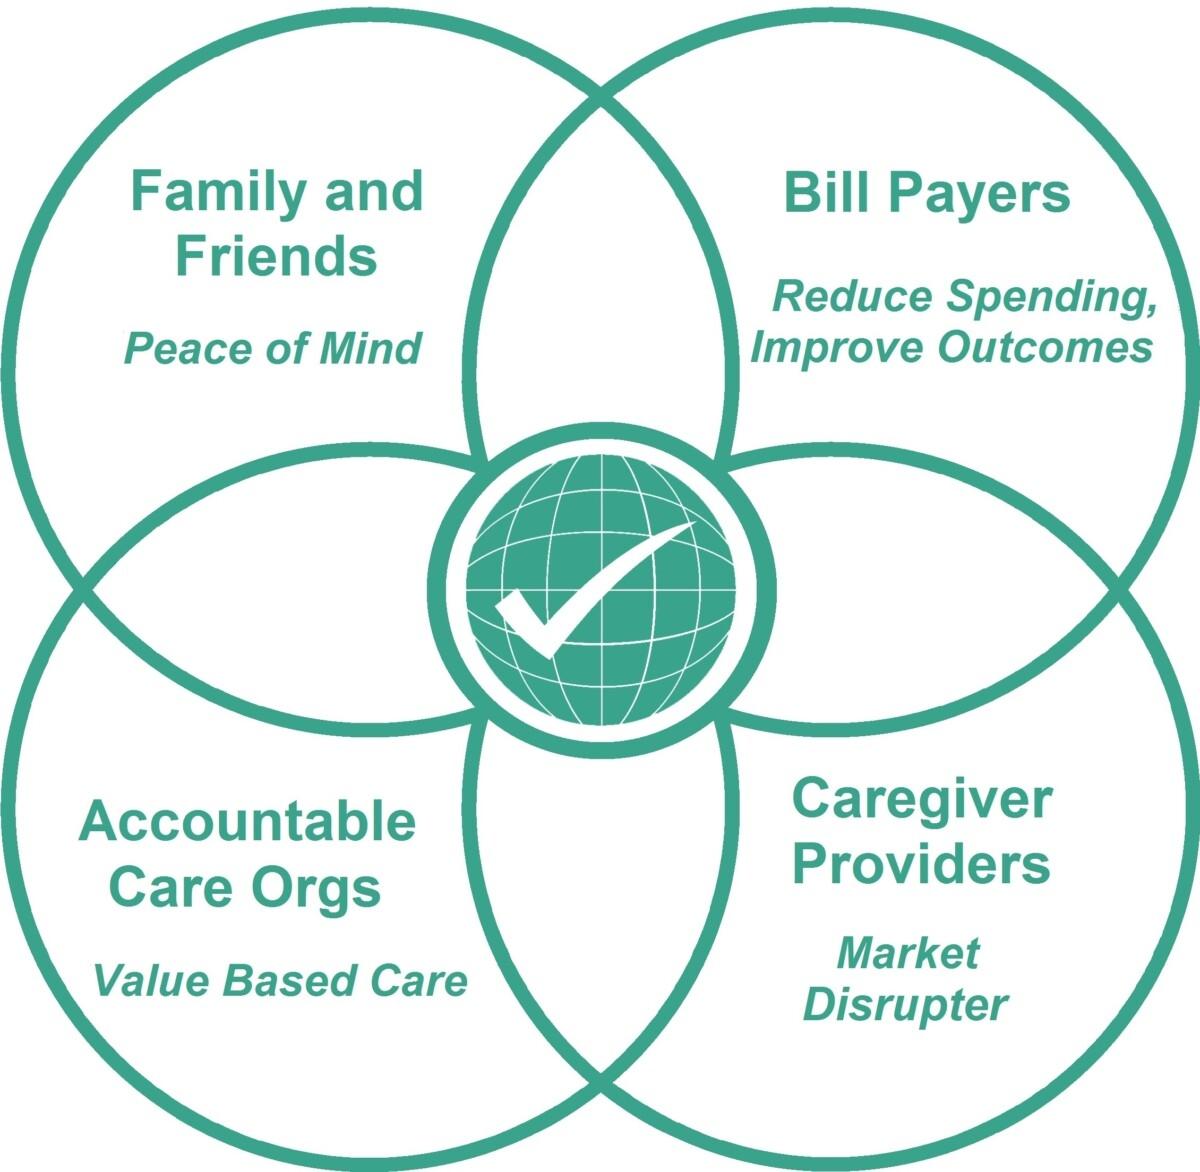 This venn diagram shows some key components of Home Care LINK